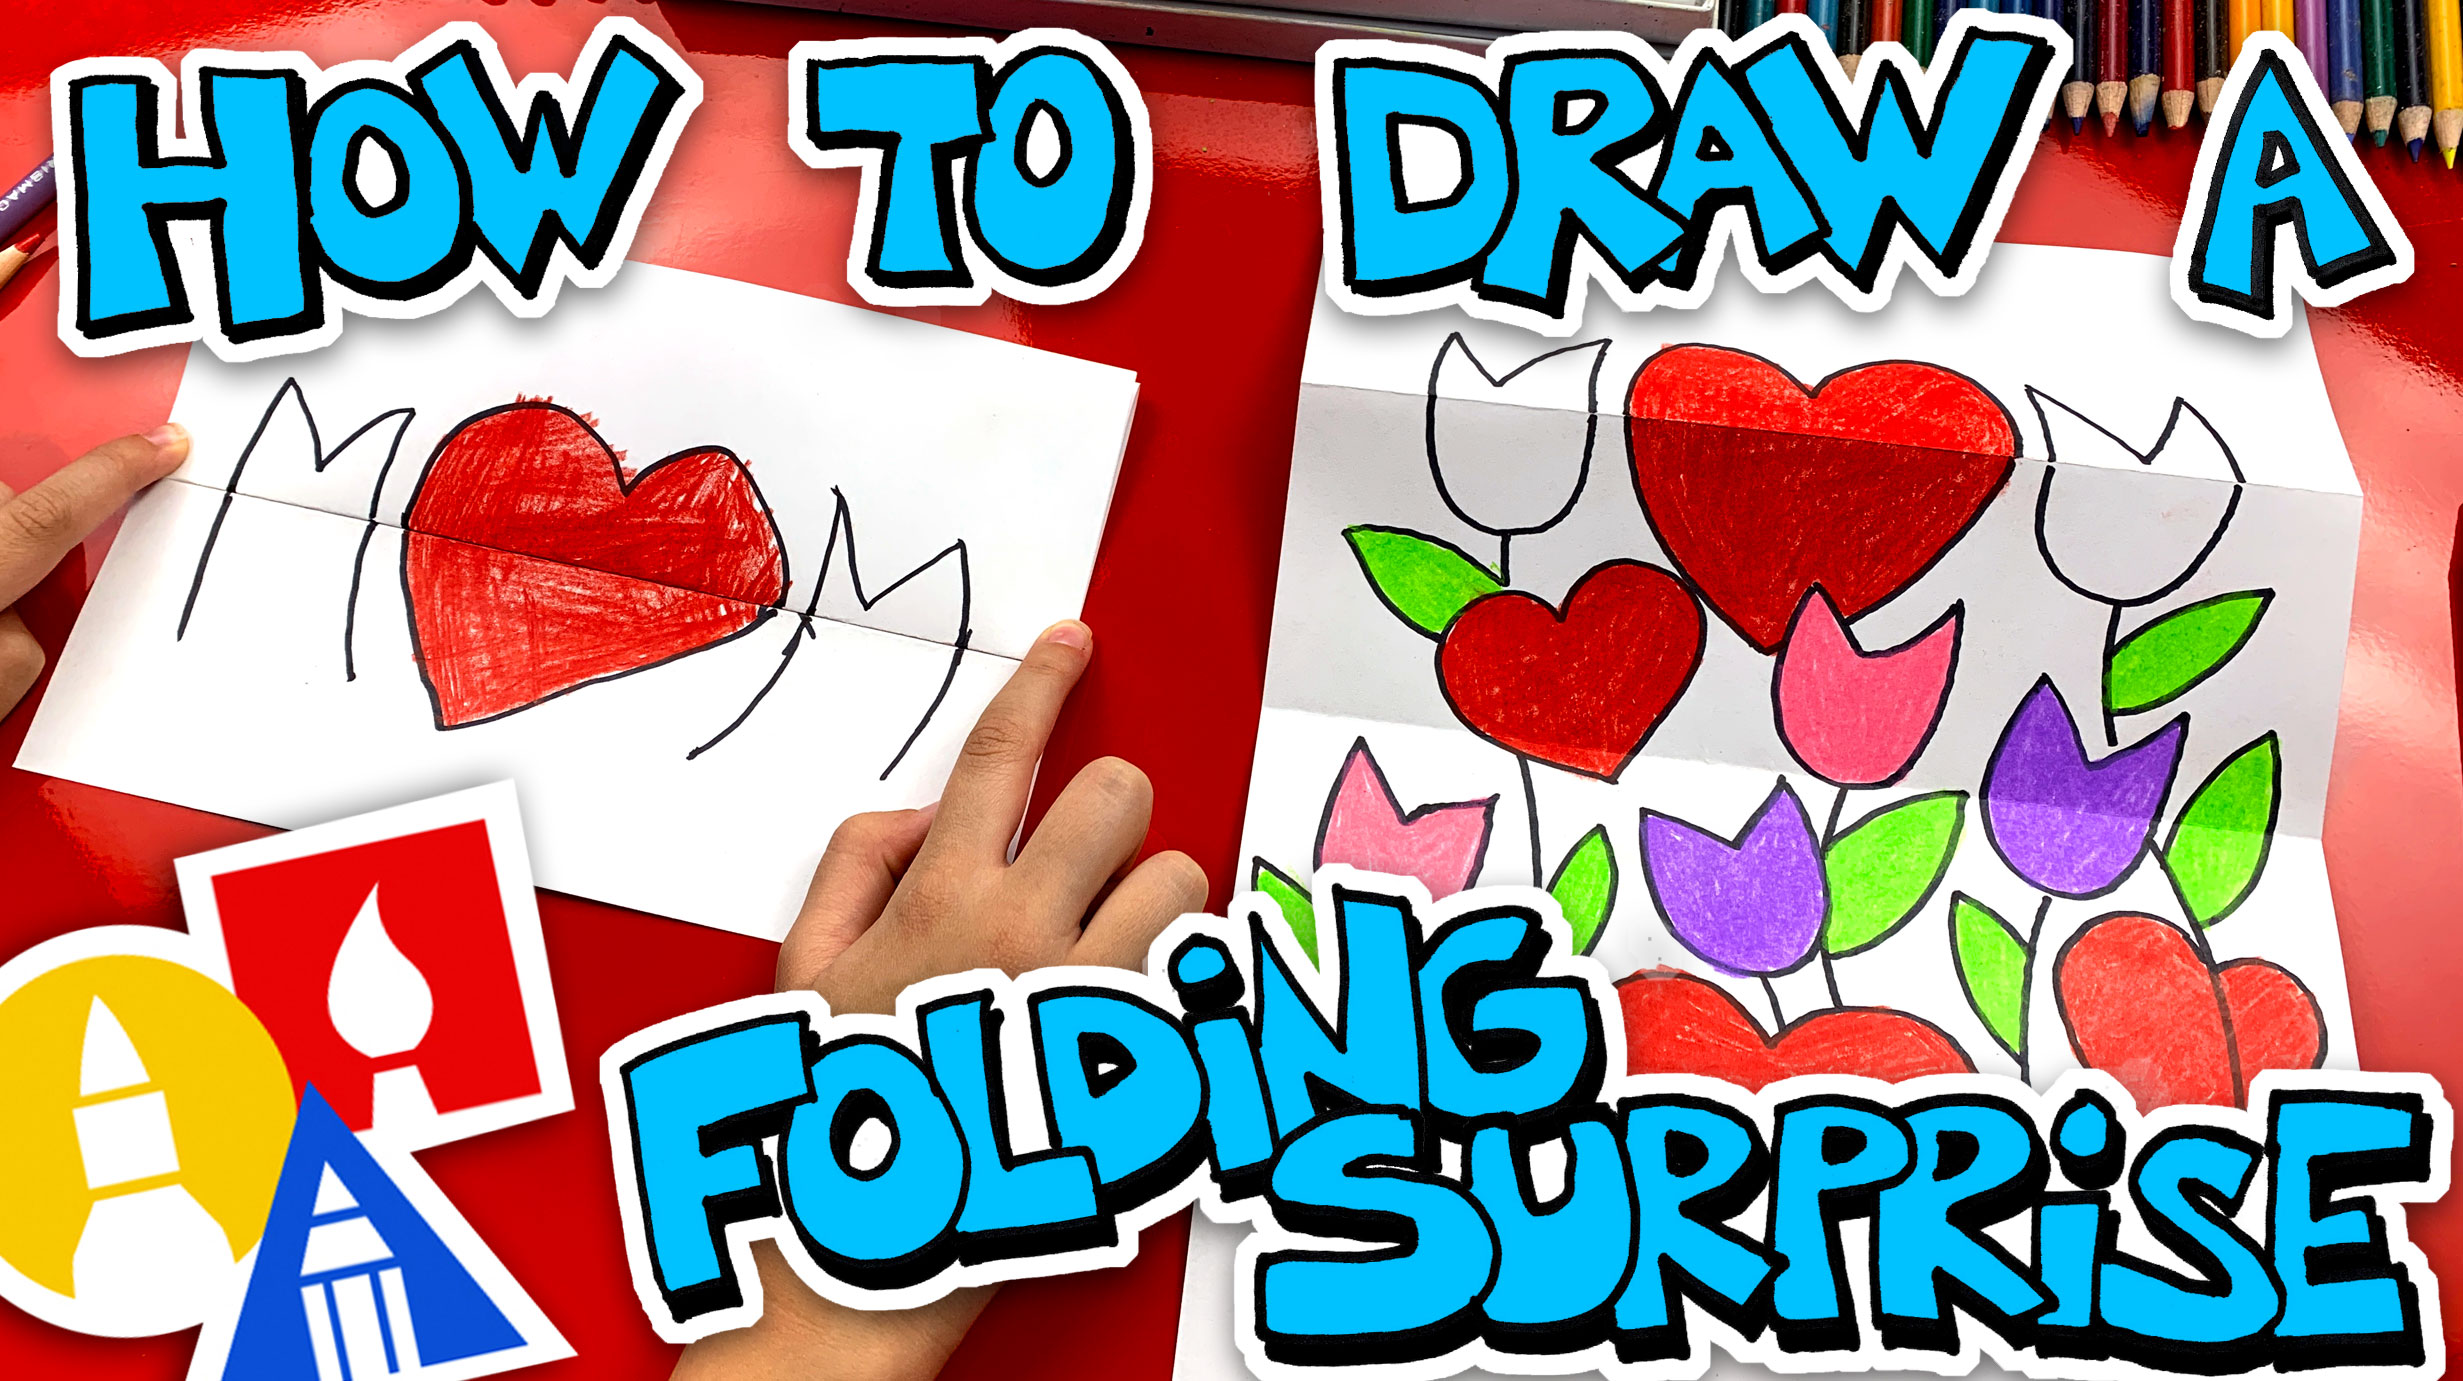 How To Draw A Mothers Day Folding Surprise - Art For Kids ...